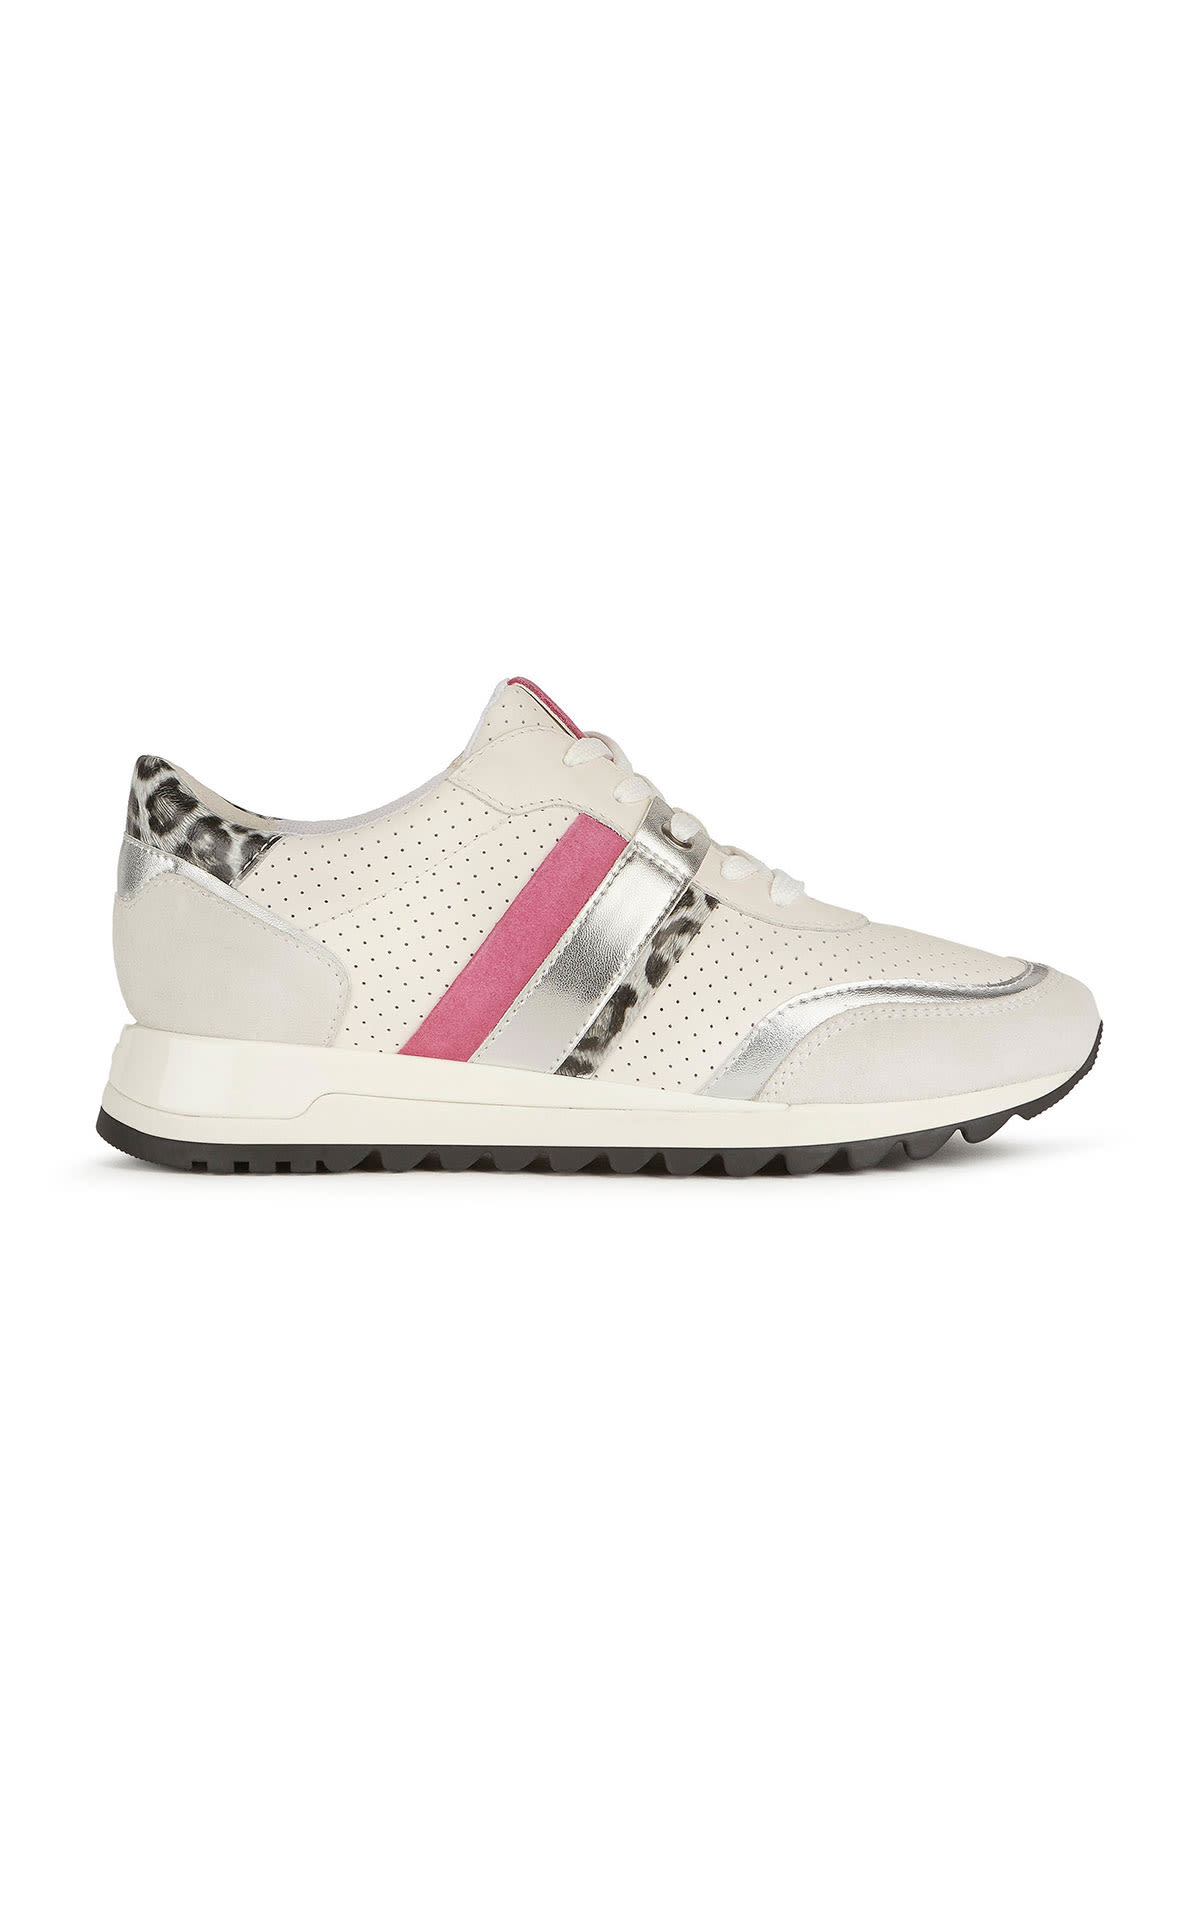 White sneaker with pink, silver and animal print detail Geox